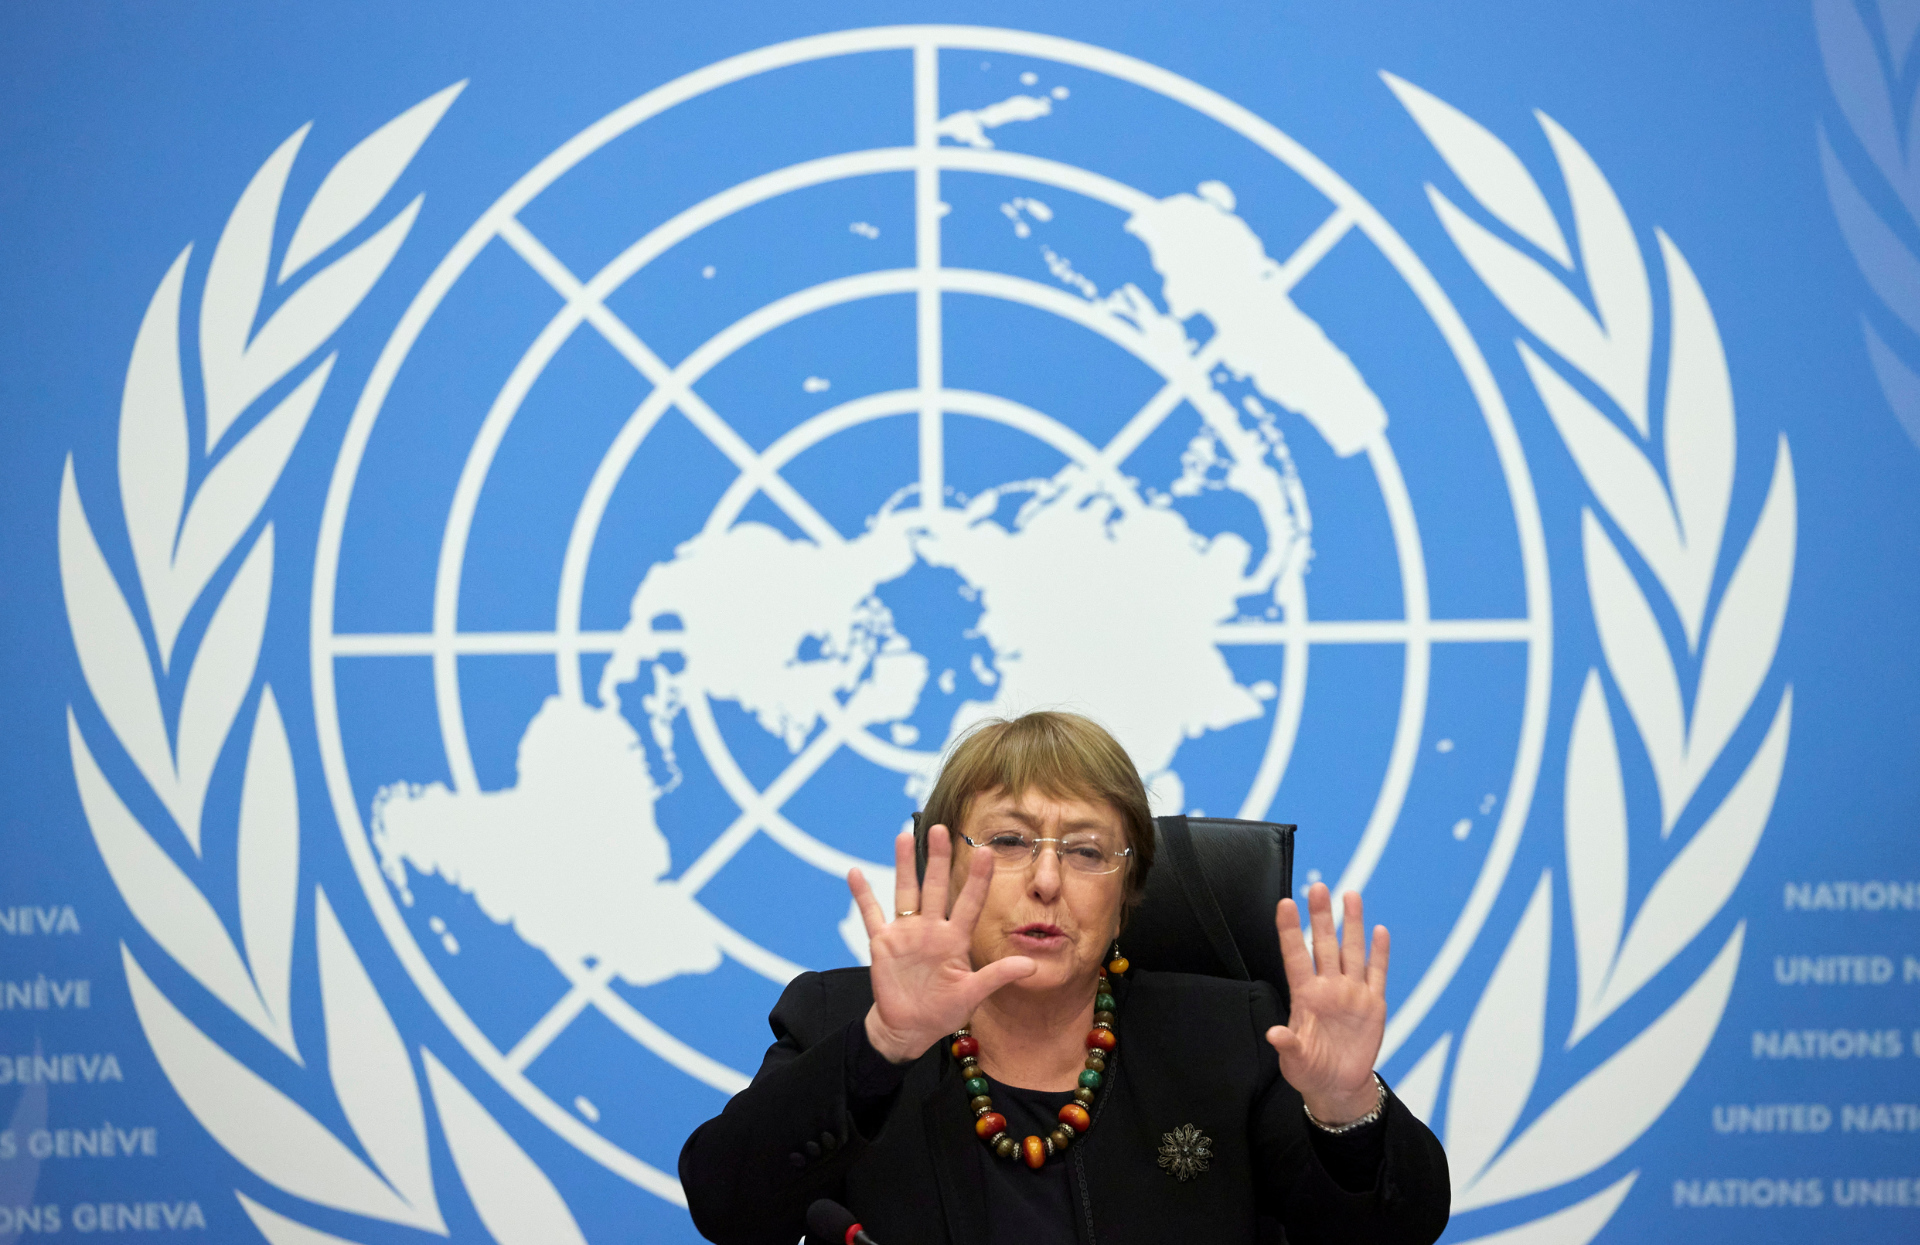 Michelle Bachelet, the UN High Commissioner for Human Rights, at a news conference